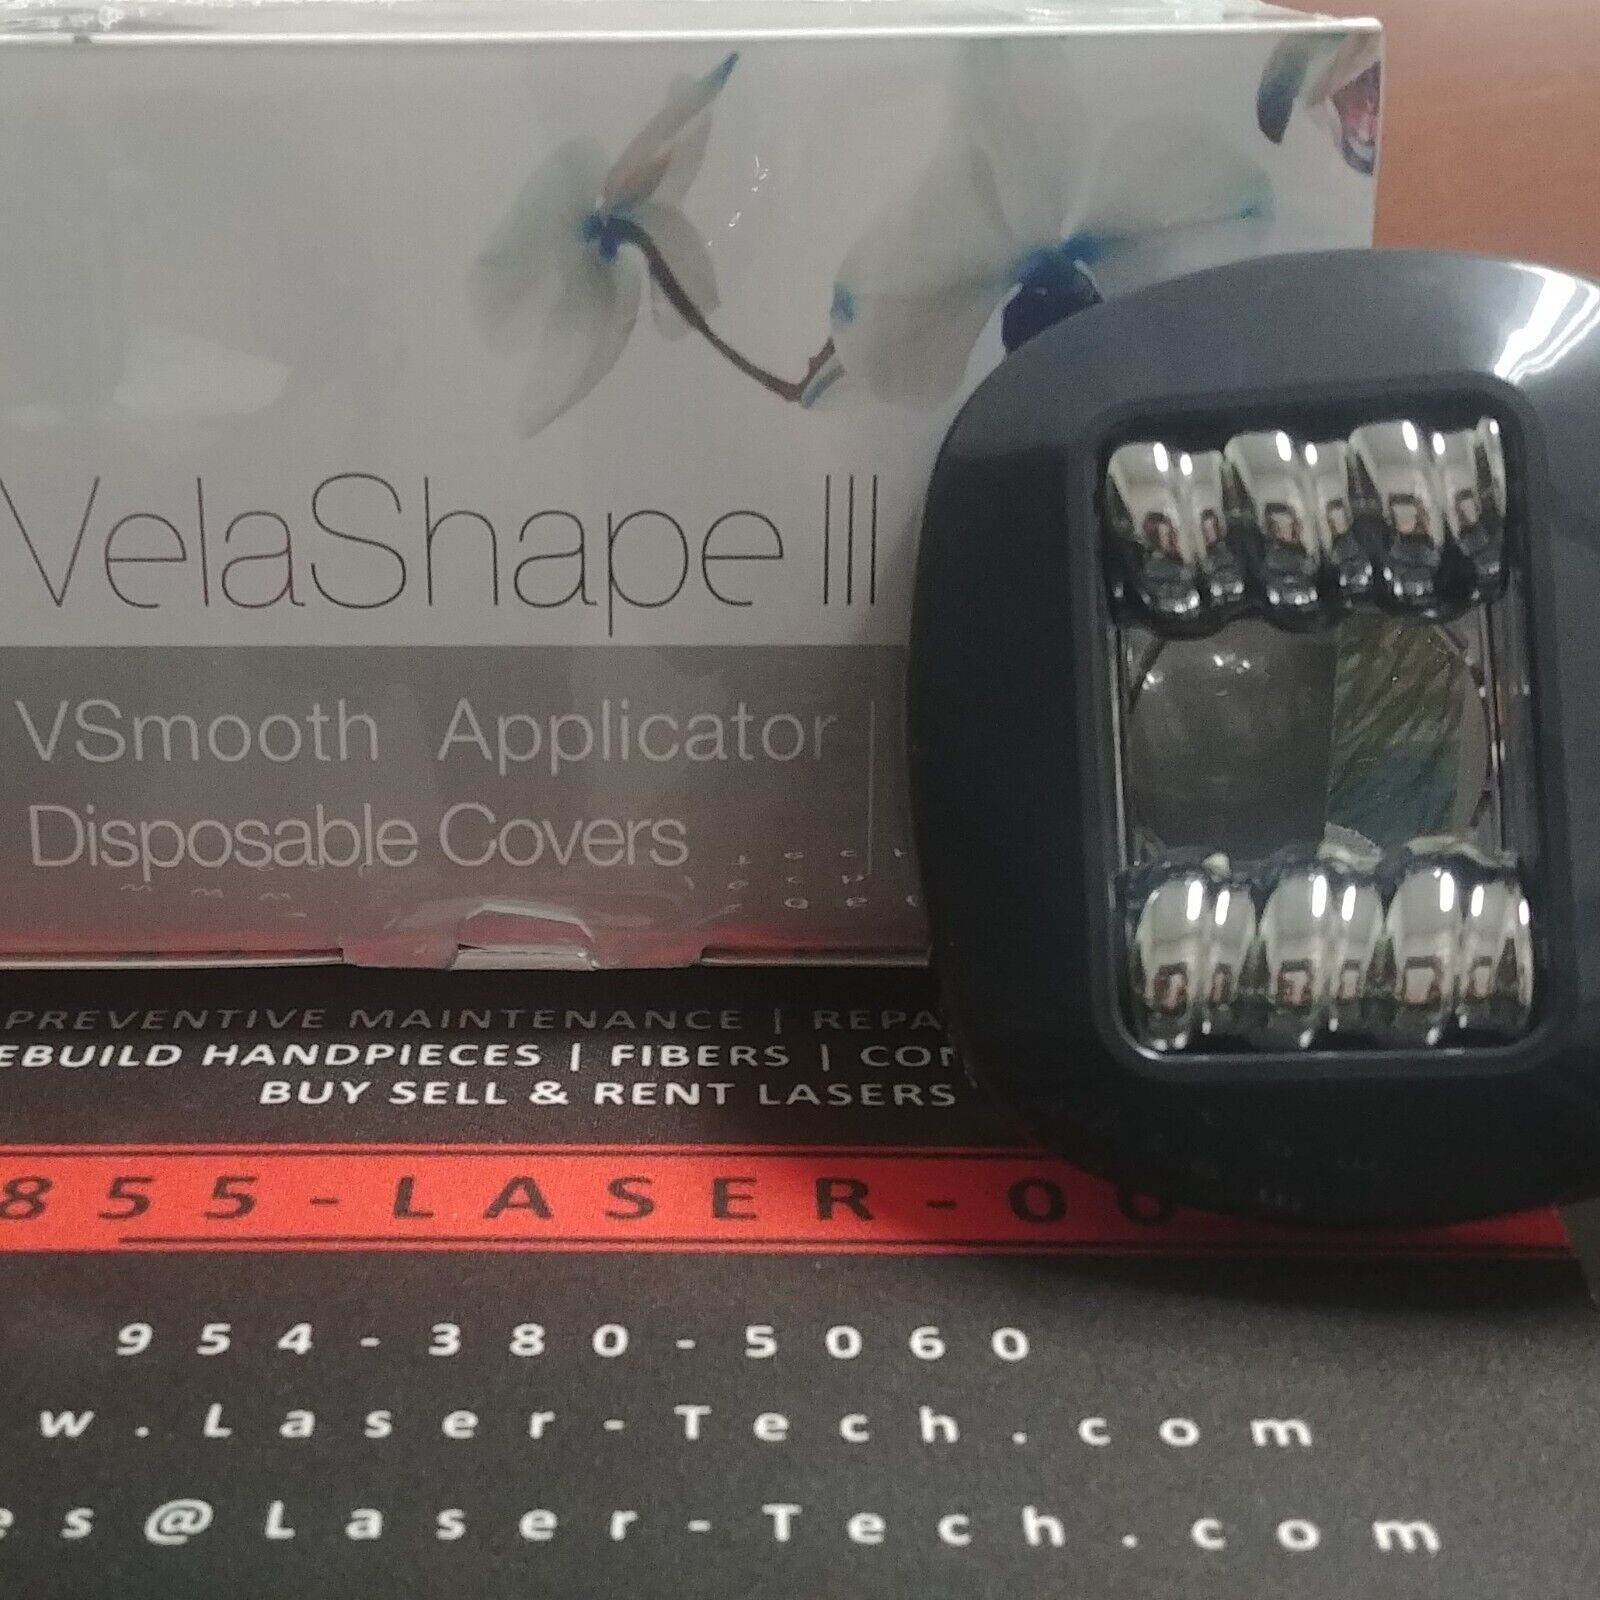 “Box Of 5” SYNERON VELASHAPE III 8 HOURS LARGE COVER FOR VSMOOTH (LARGER HANDPIE